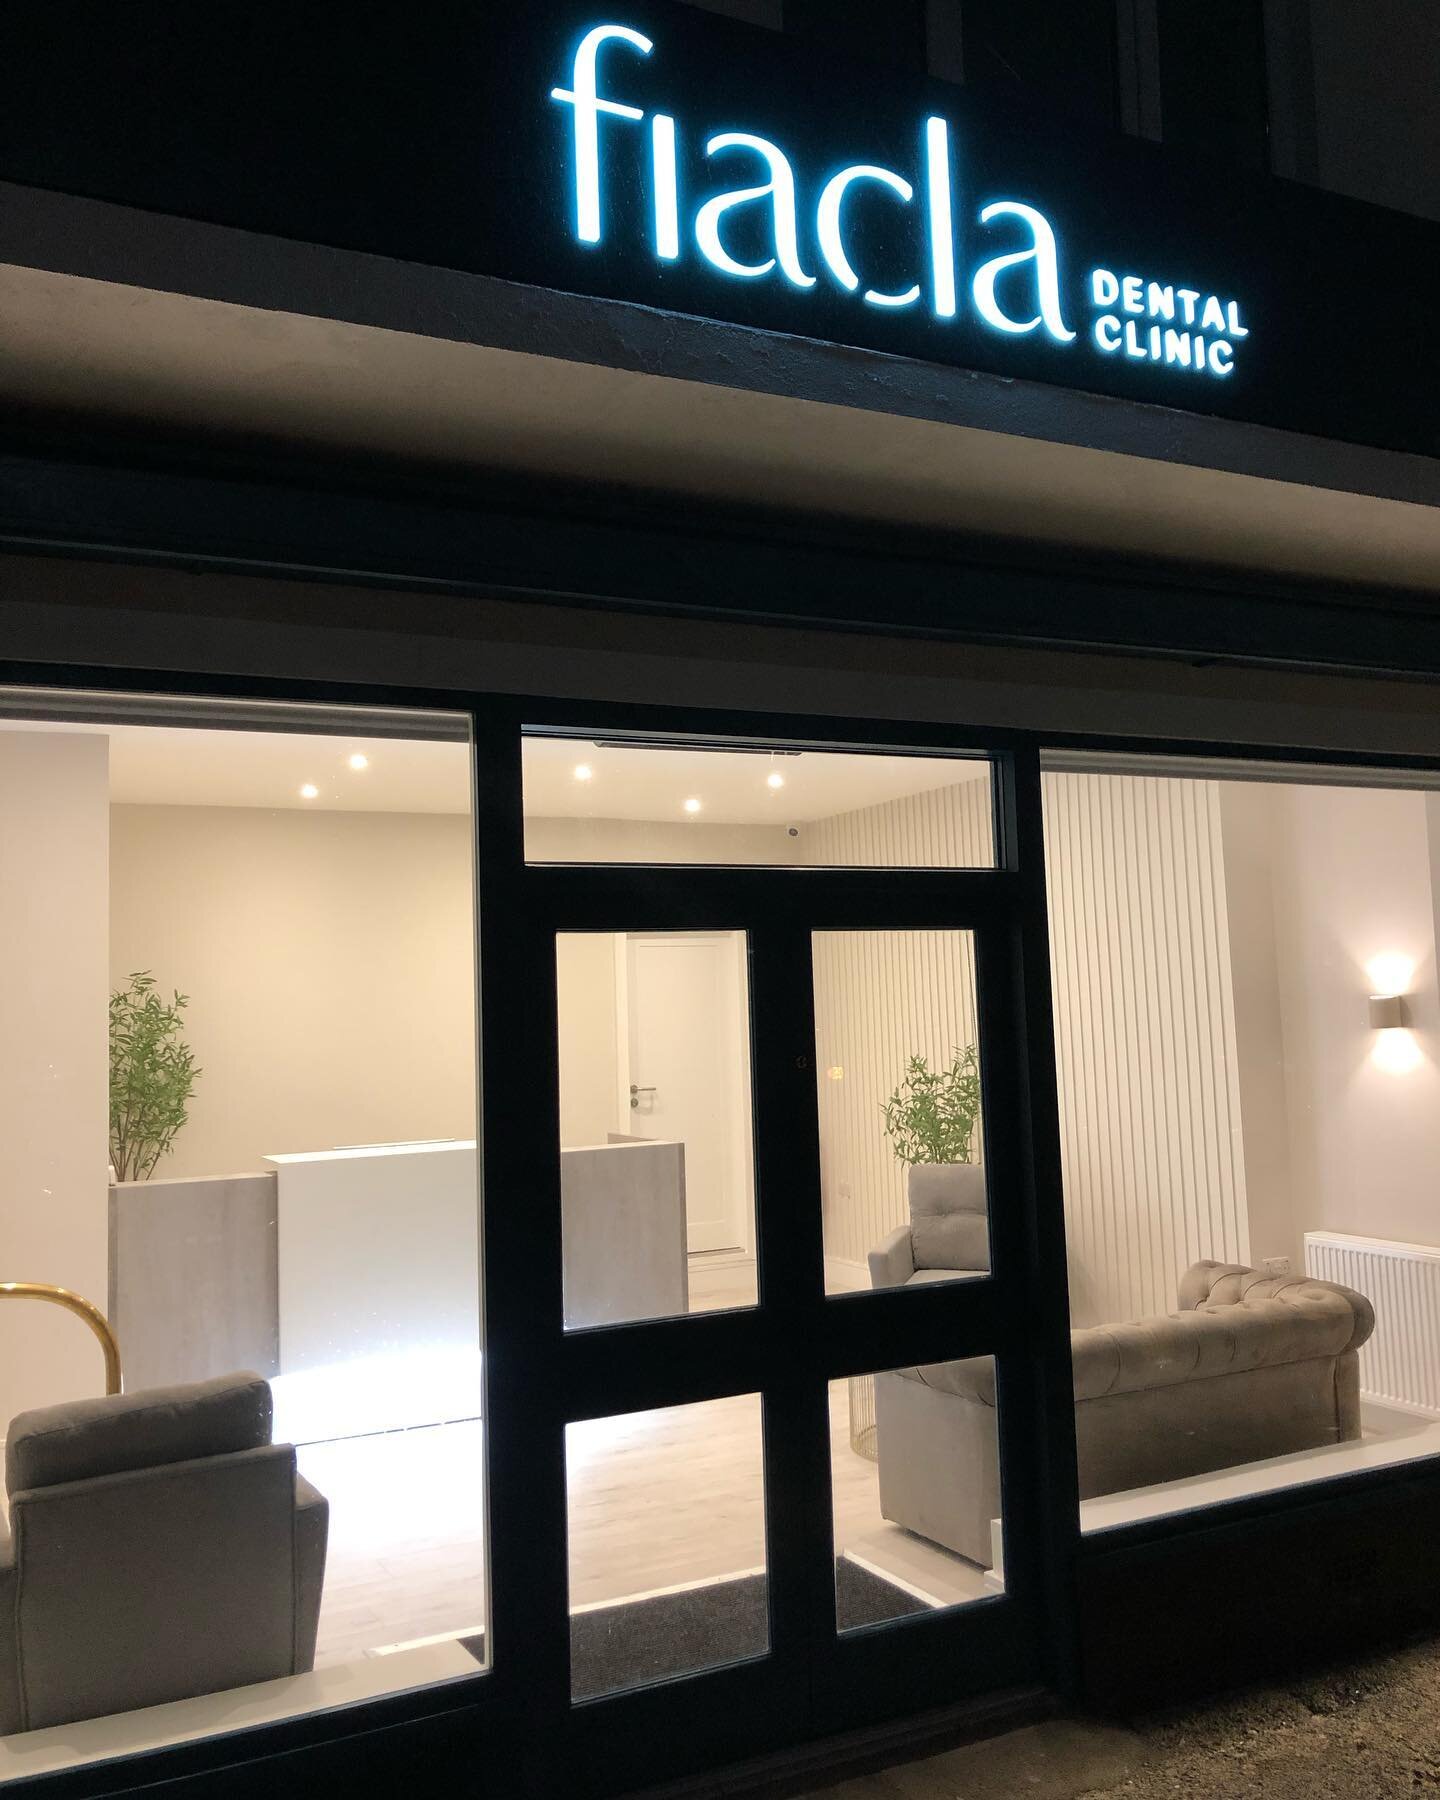 The doors are now open to our brand new dental clinic in Churchtown, Dublin 14 - drop by to have a look or make a booking now at www.fiacladental.ie